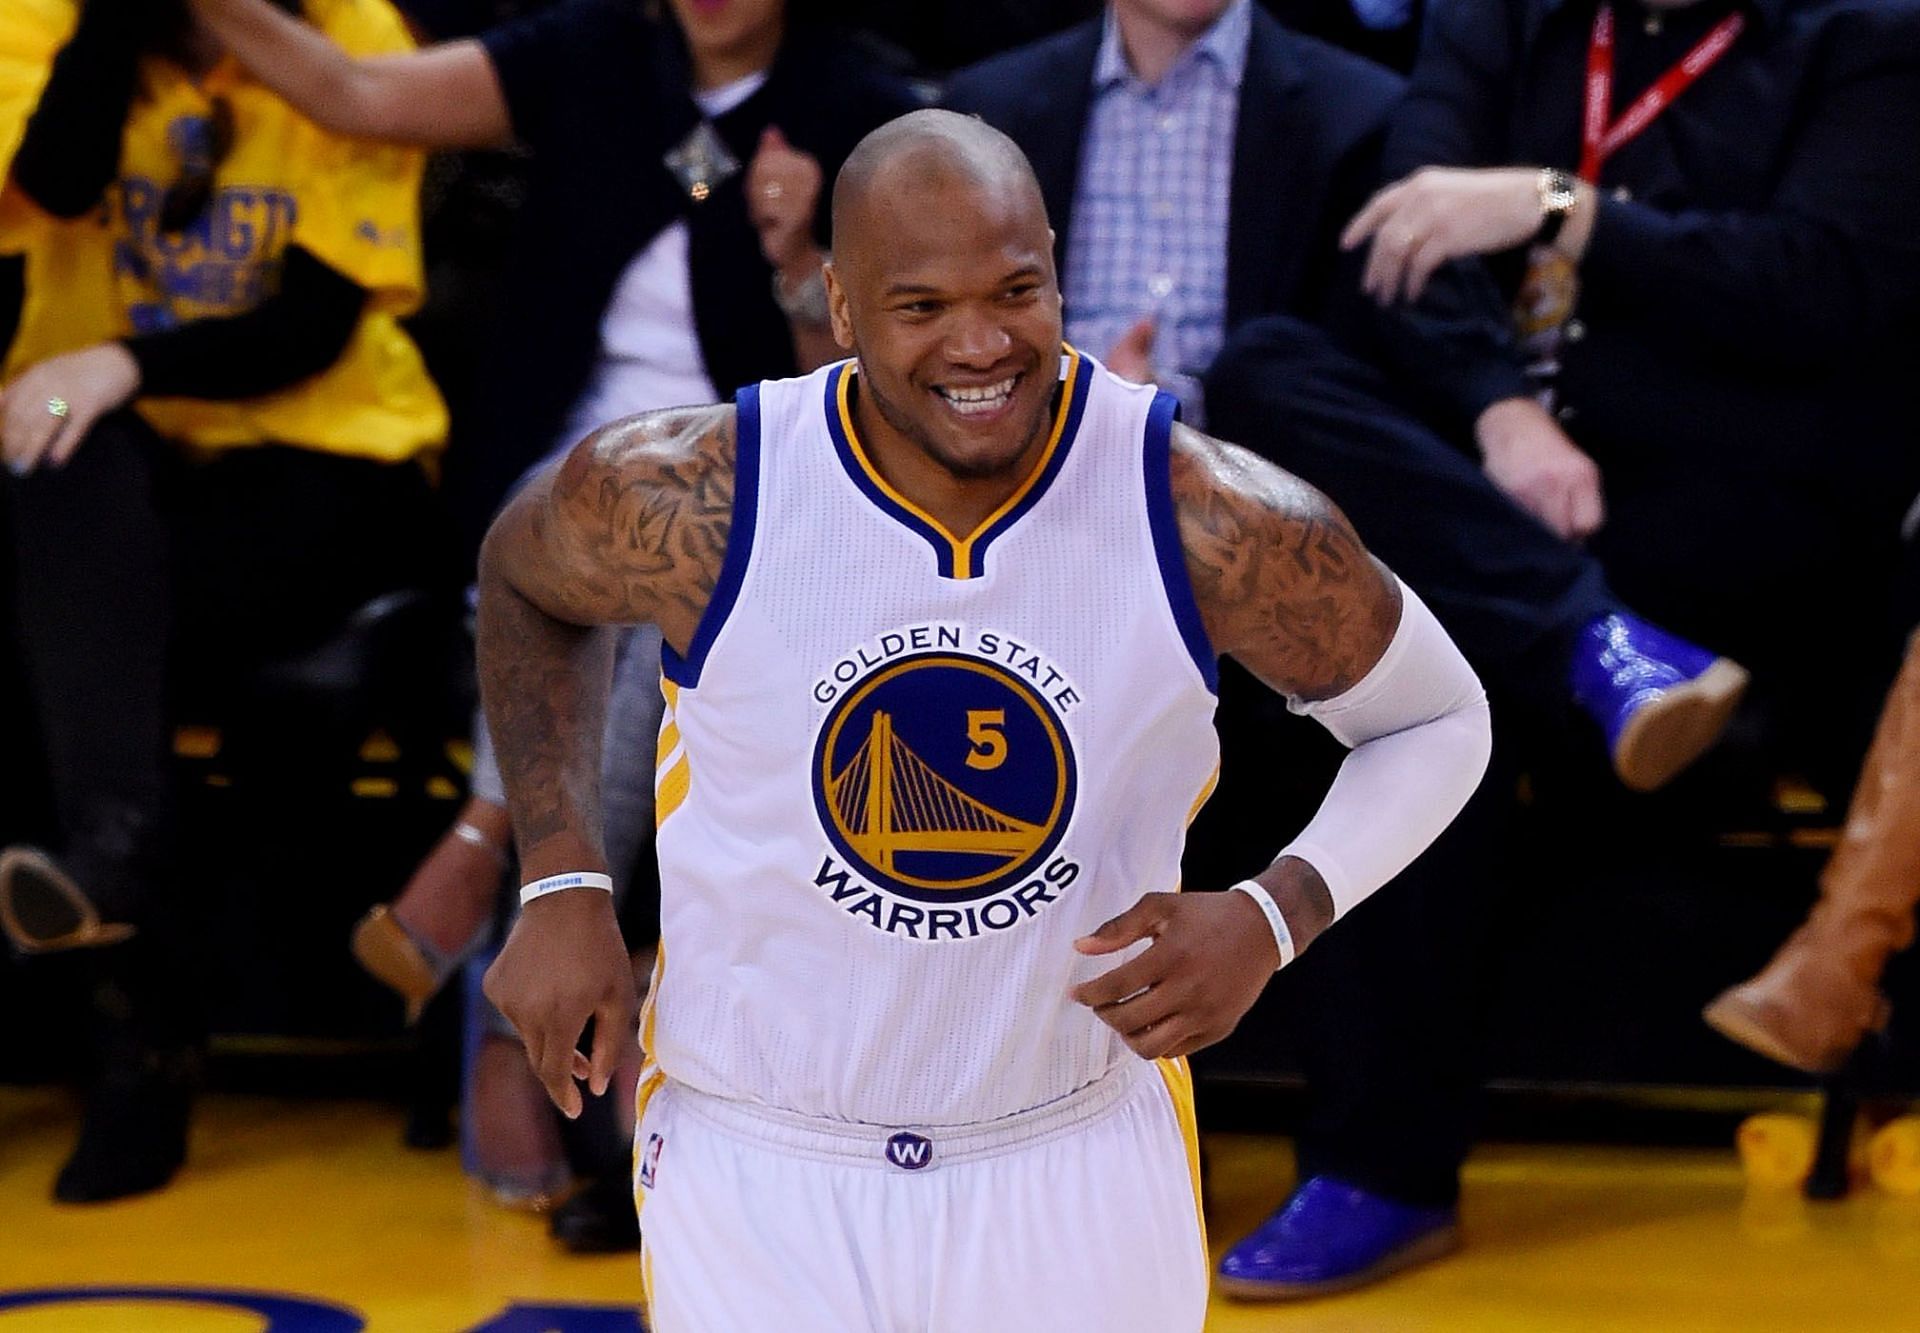 Marreese Speights is an NBA and NCAA champion.